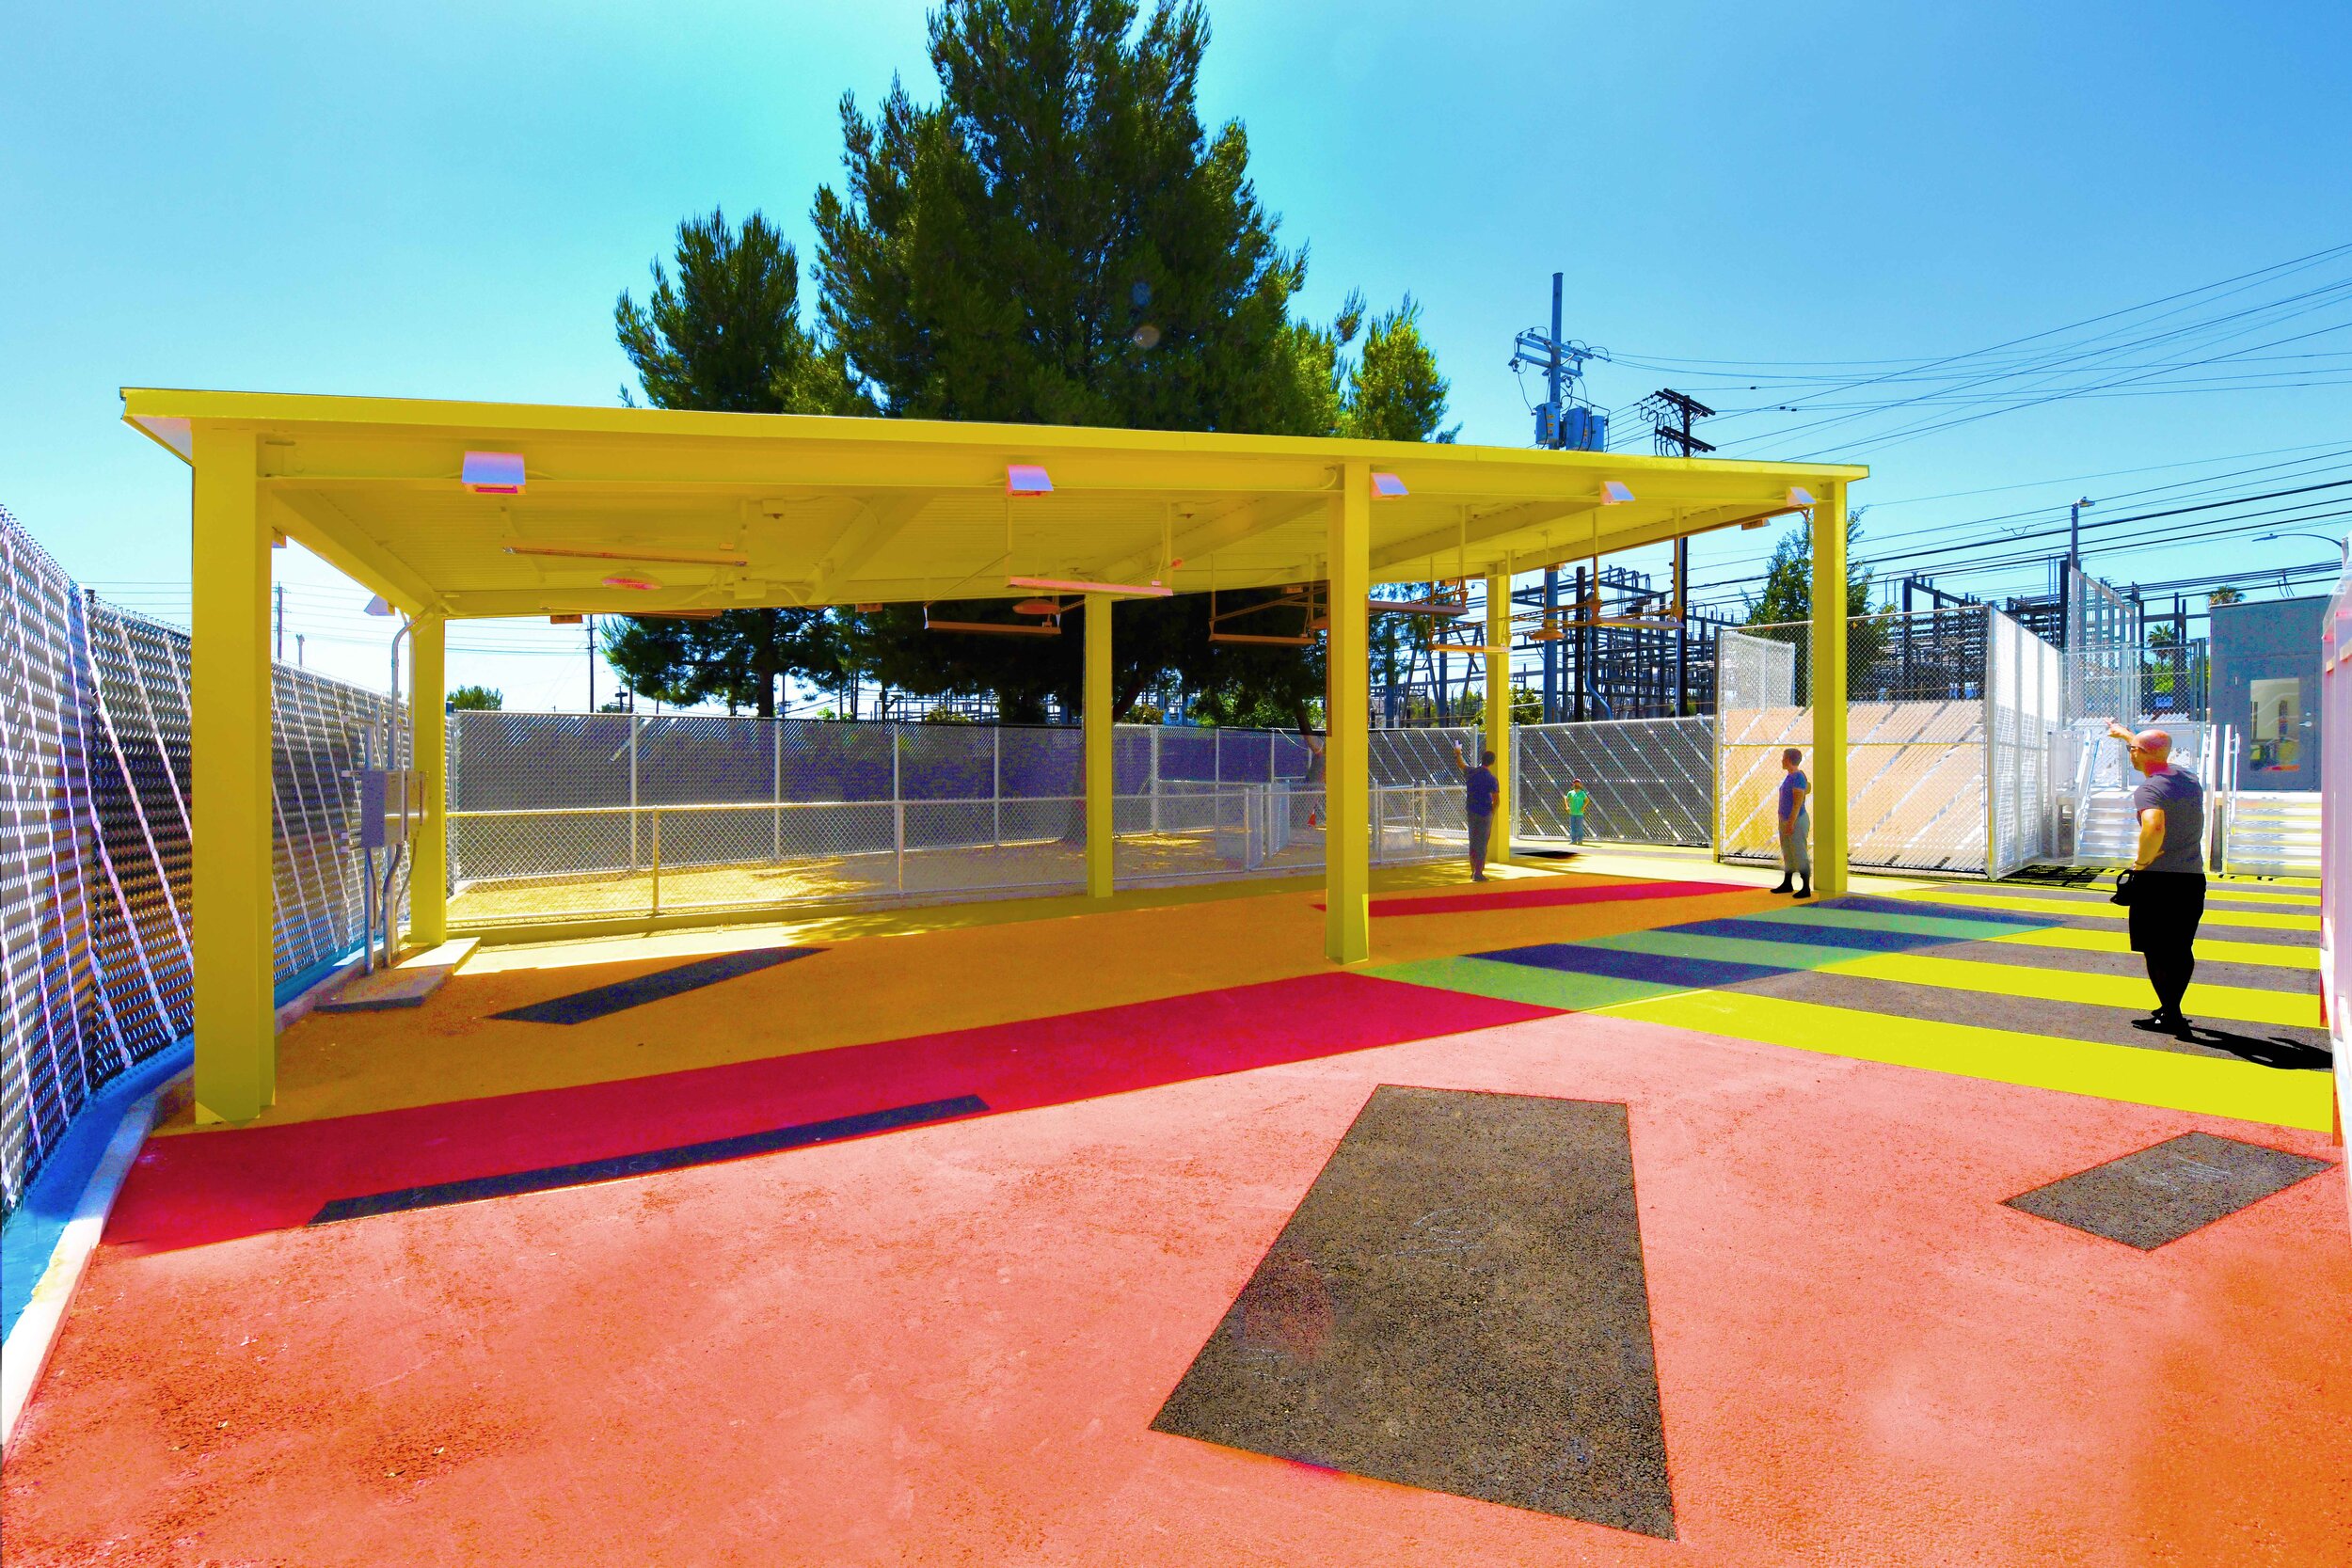 A Temporary Shelter Addresses L.A.’s Homeless Crisis Through Surface and Color (Metropolis)